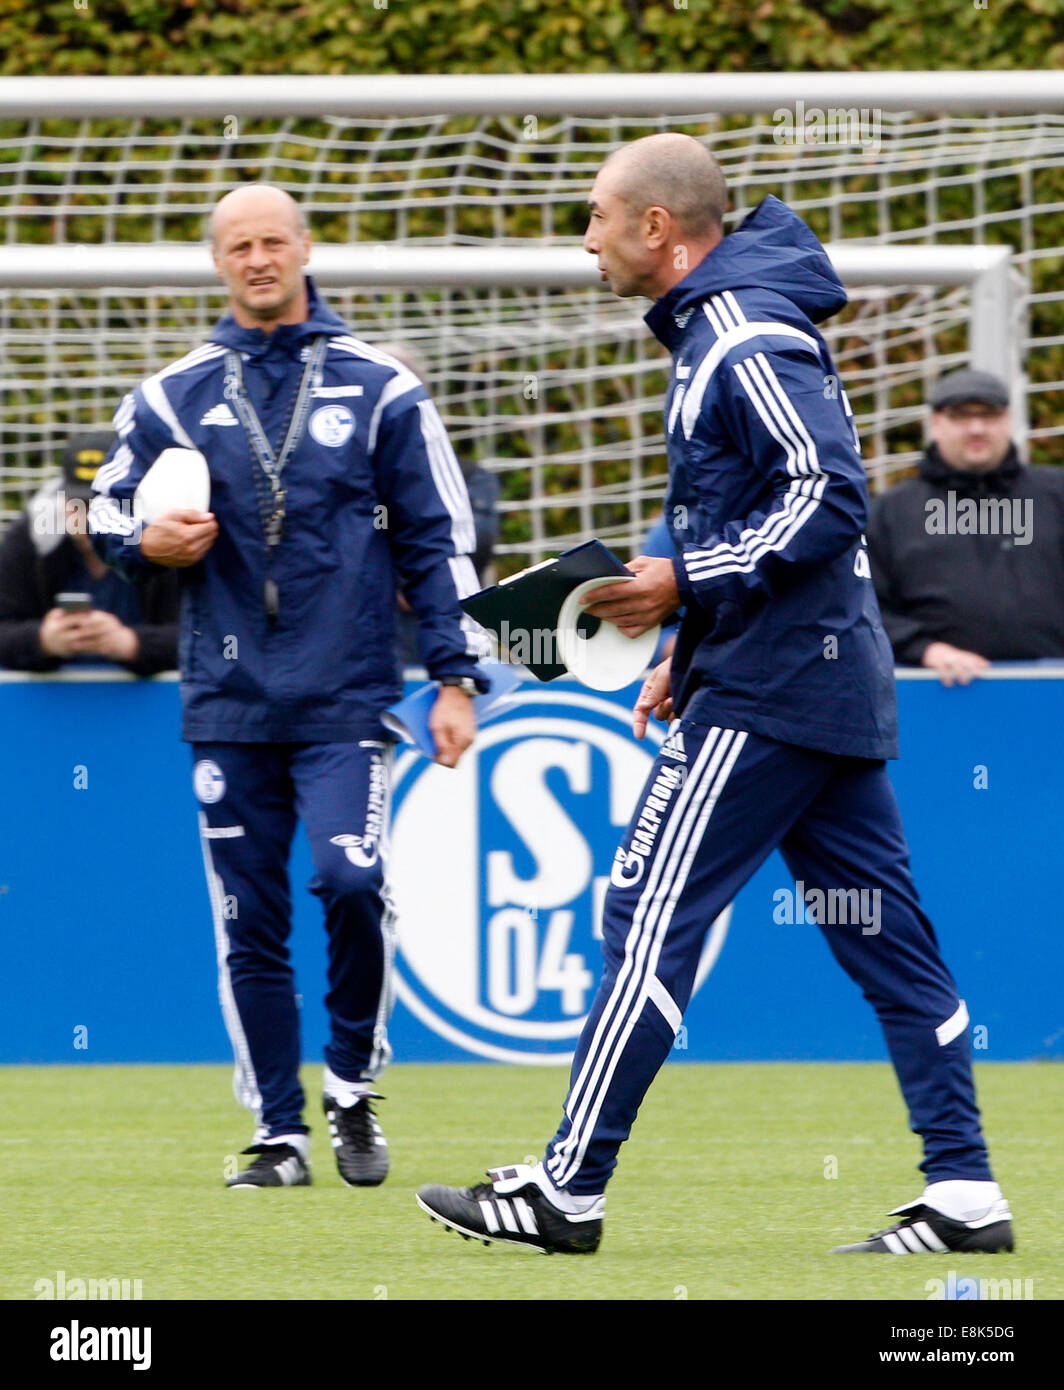 Geselnkirchen, Germany. 9th Oct, 2014. The new headcoach of German Bundesliga soccer club Schalke 04, Roberto di Matteo, leads his first training session with assistant coach Attilio Lombardo in Geselnkirchen, Germany, 09 October 2014. Matteo takes over from Jens Keller. Photo: Roland Weihrauch/dpa/Alamy Live News Stock Photo